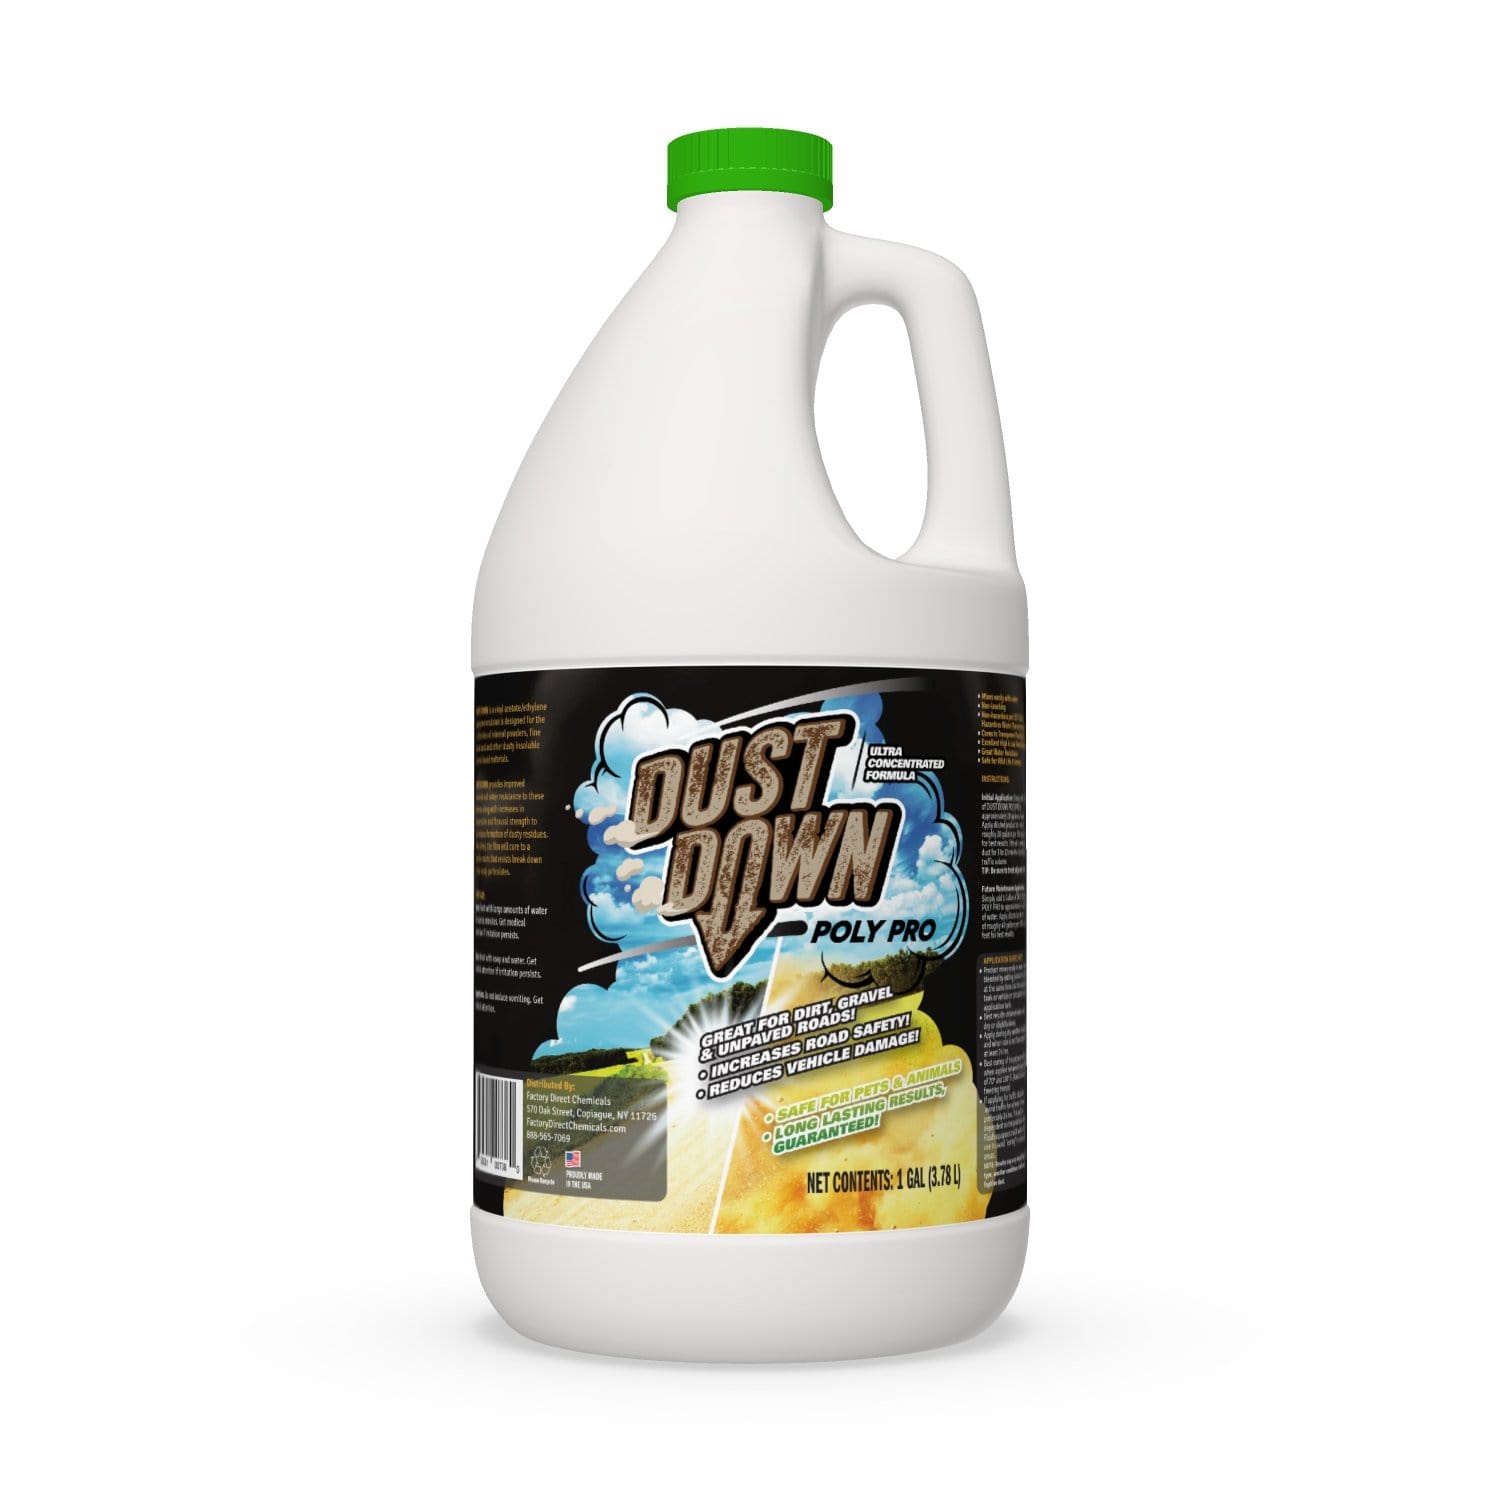 DUST DOWN "POLY PRO" for Road Dust Control - Factory Direct Chemicals